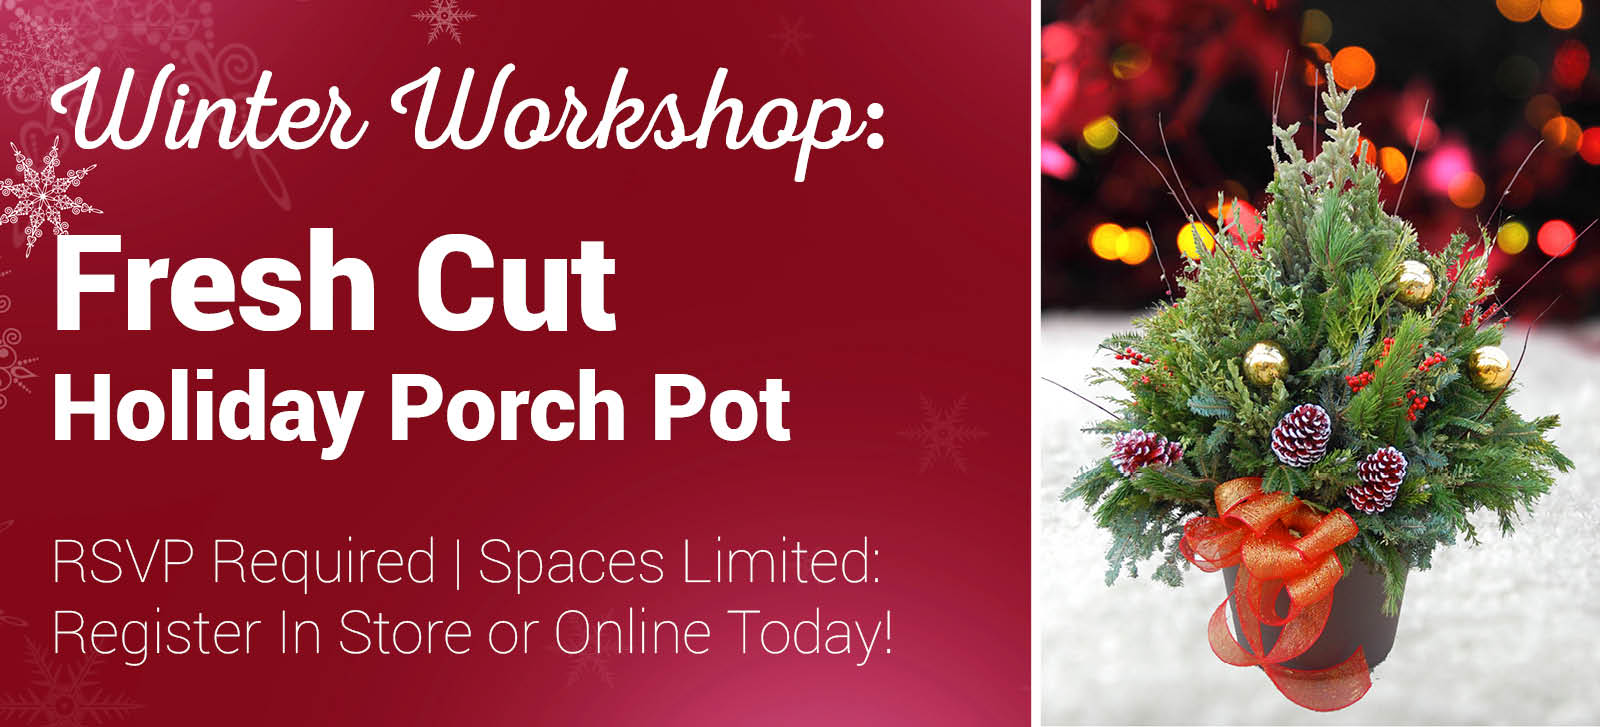 Come and create your very own custom designed Holiday Porch Pot!